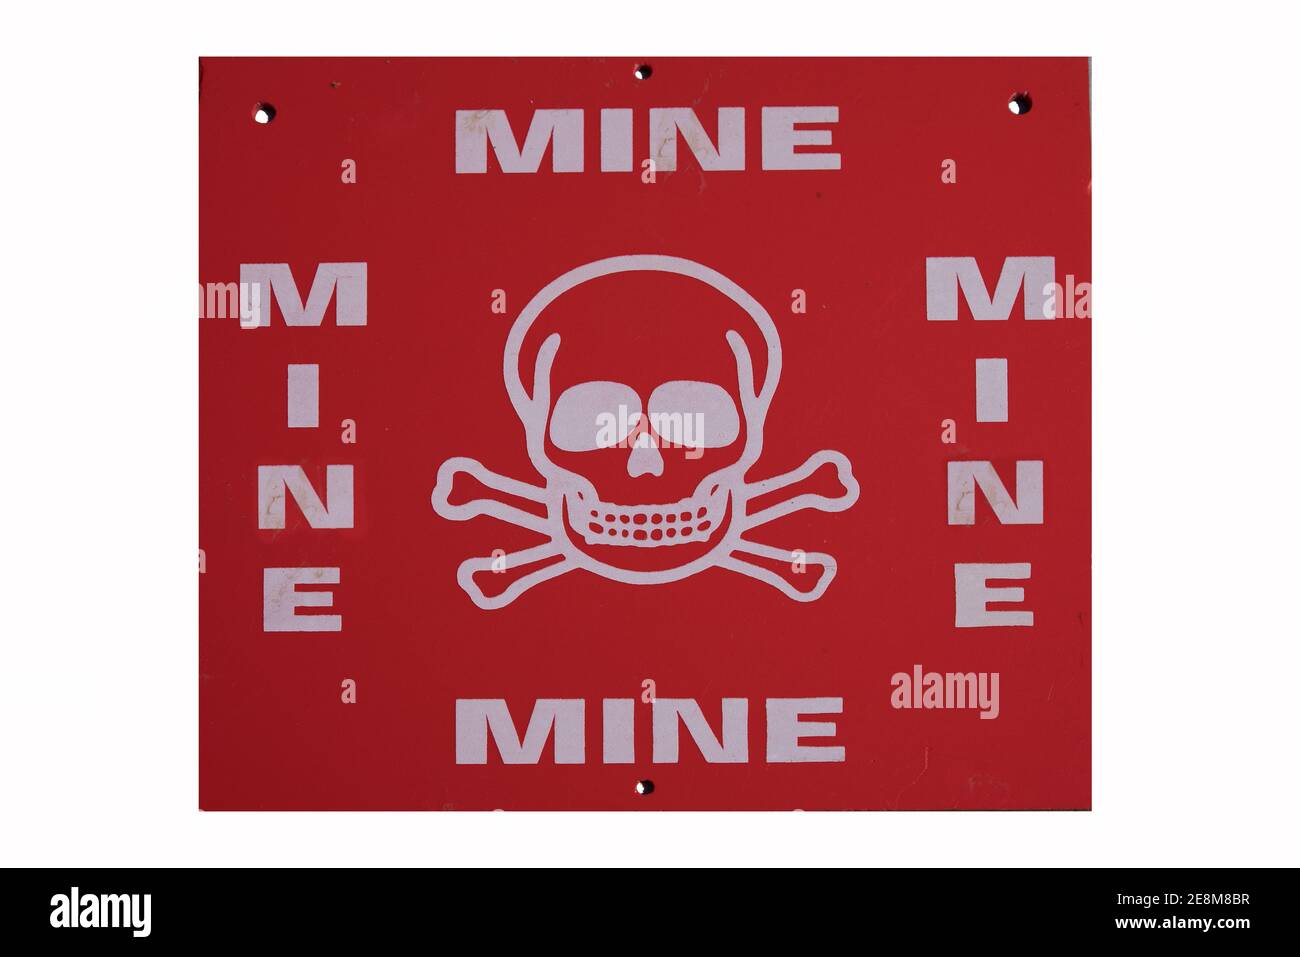 Warning sign of mines Stock Photo